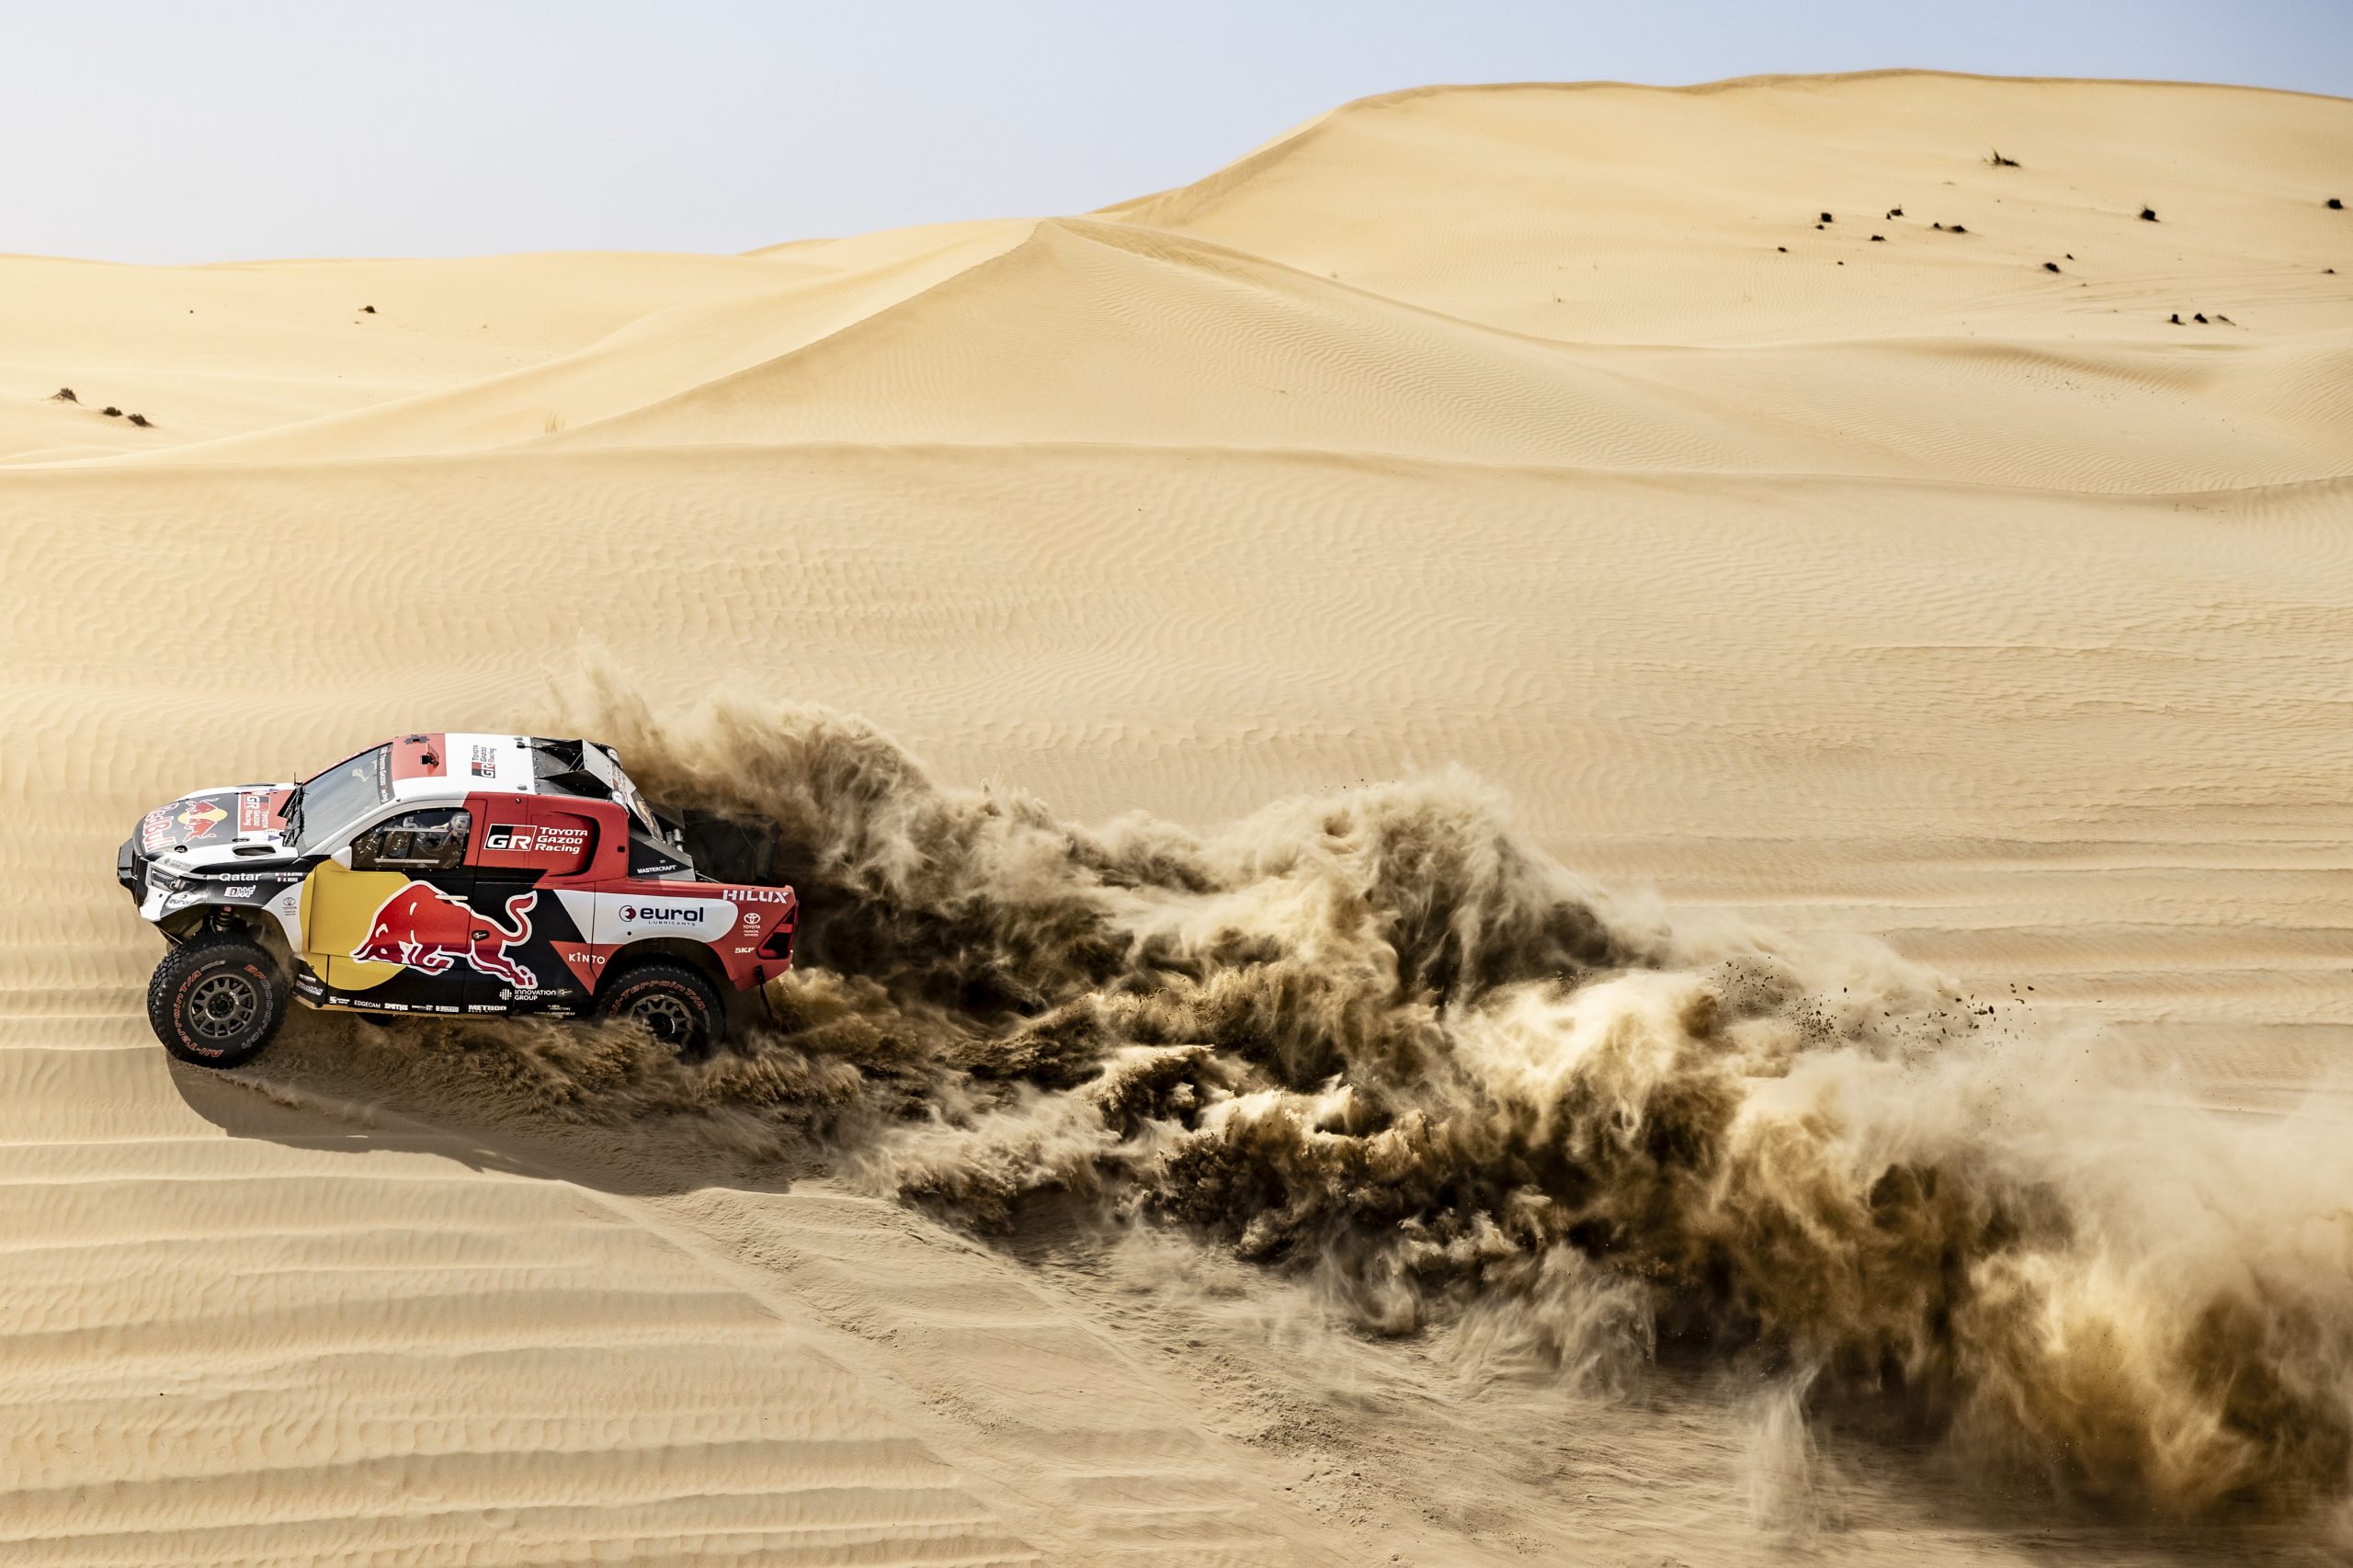 Abu Dhabi Desert Rally: Al Attiyah Hopes to Compensate Loss in First Stage